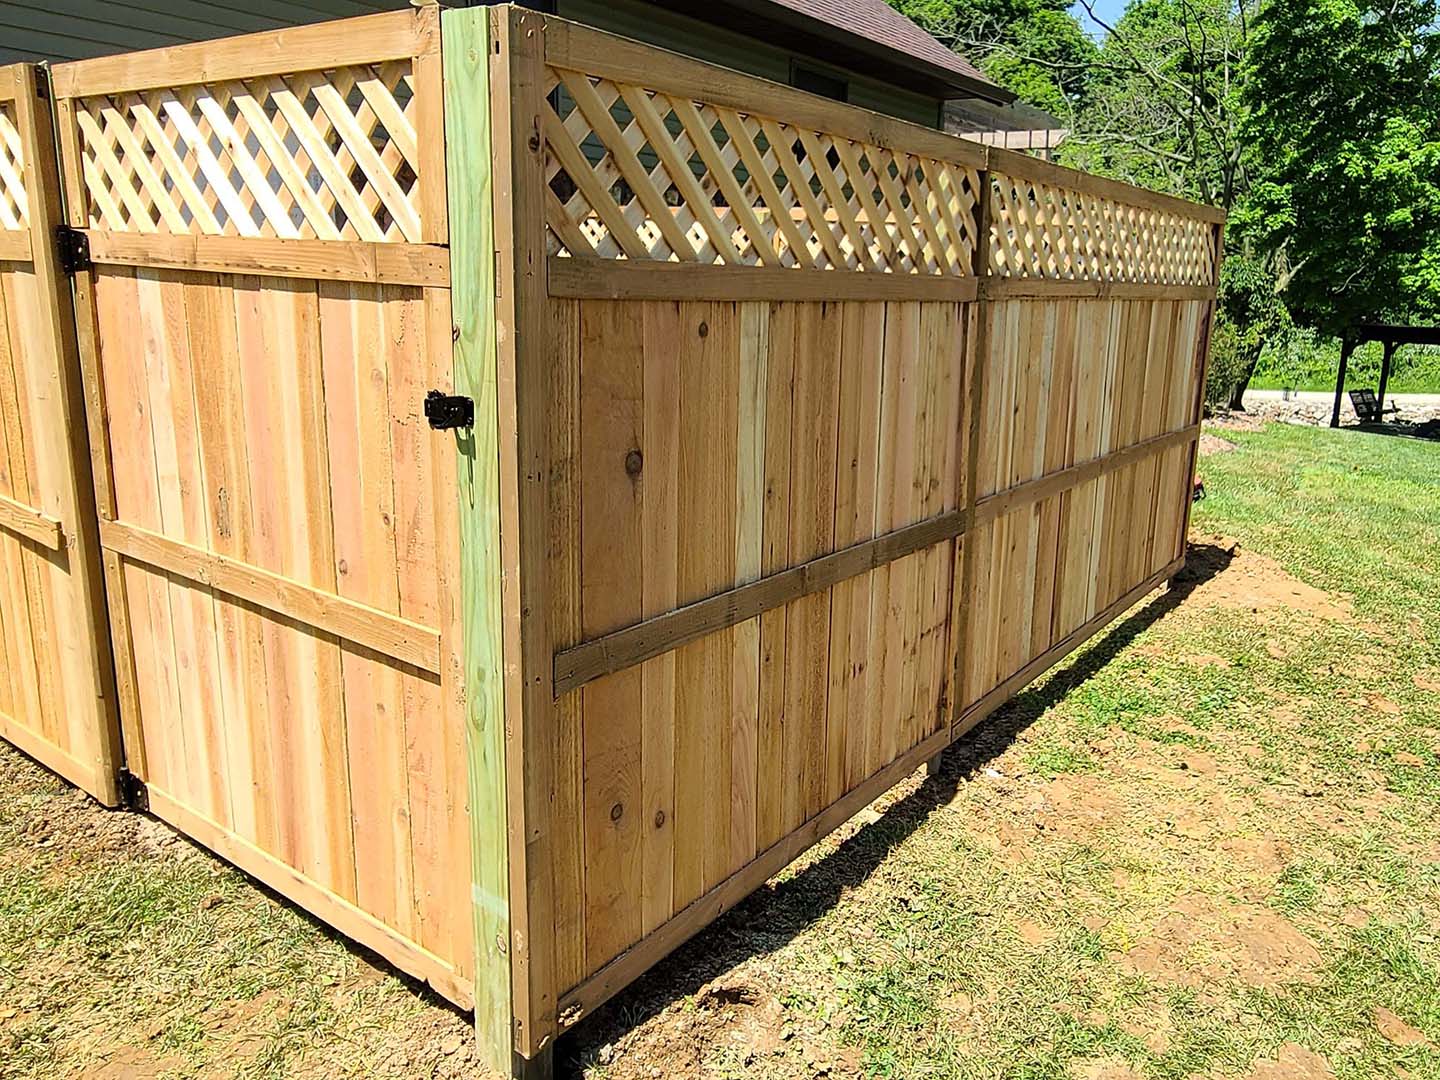 Terre Haute Indiana residential fencing contractor